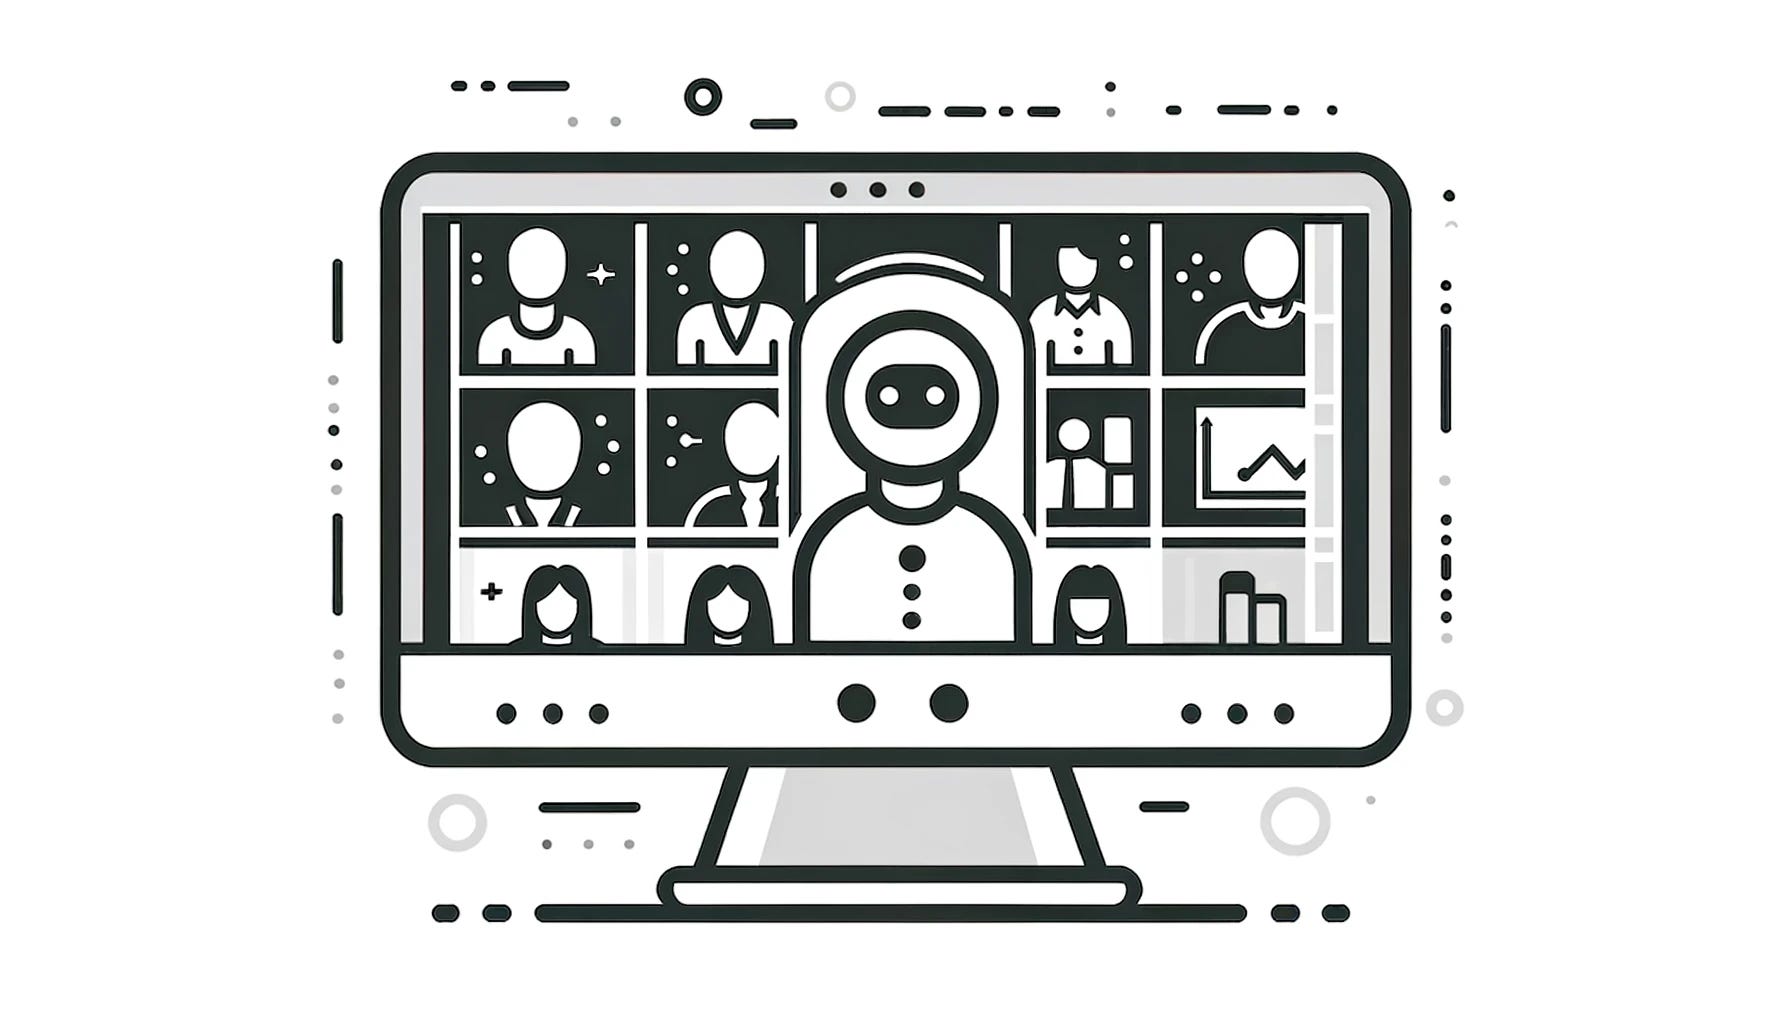 A minimalist greyscale illustration on a white background depicting an online conference. The image shows a simple computer screen outline with a few participants' icons arranged in a Zoom-like meeting layout. One icon represents an AI, indicated by a simple robot or digital face among the human icons.